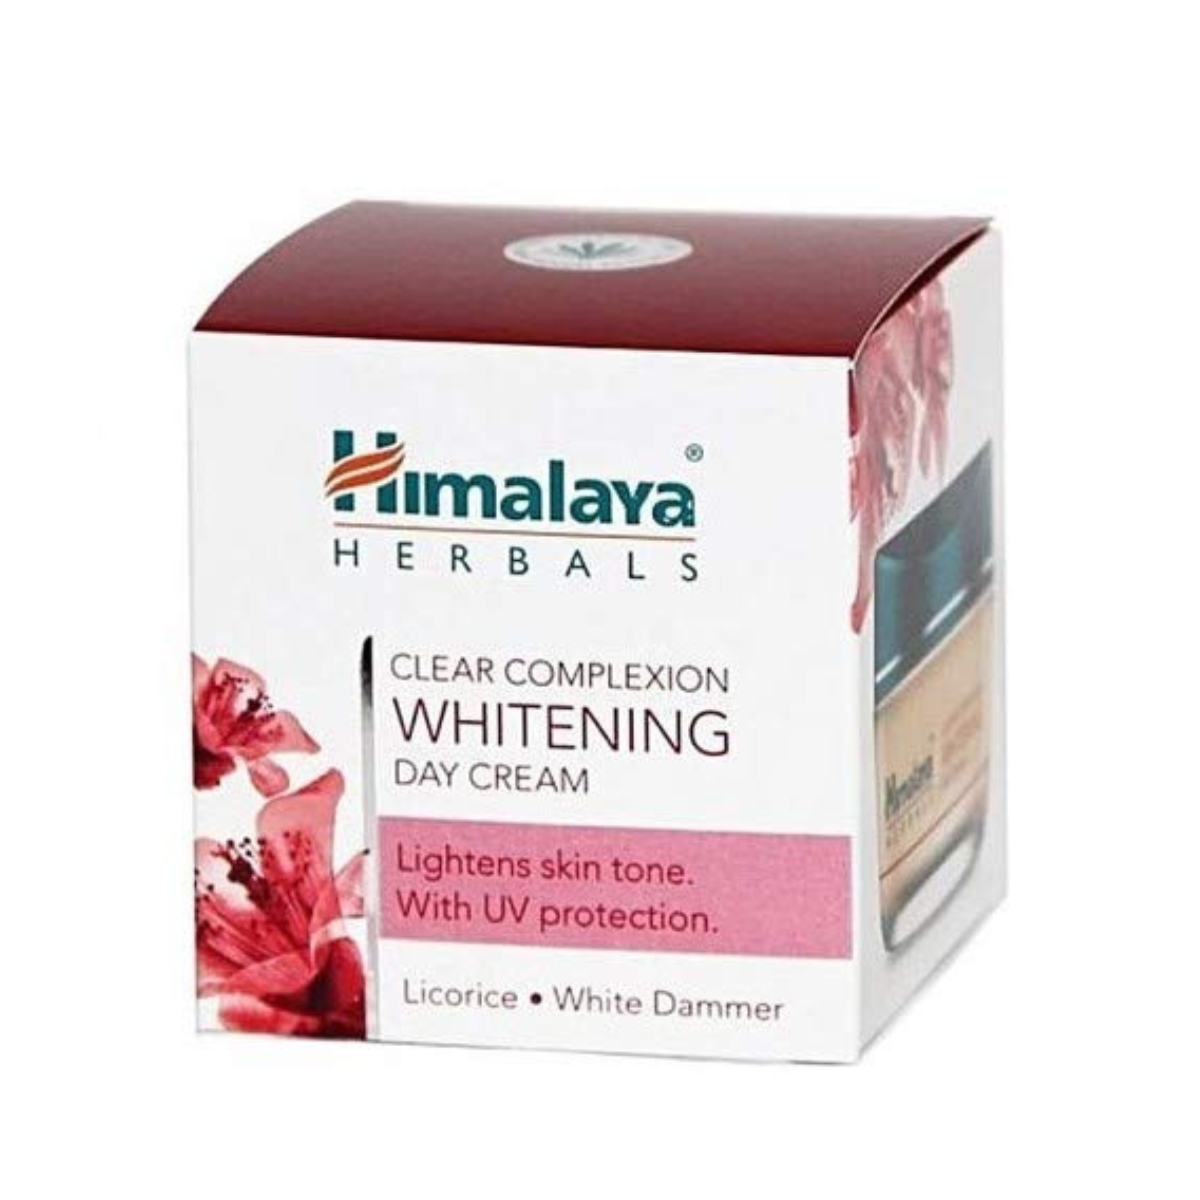 Himalaya Clear Complexion Brightening Day Cream - Brightens Skin With UV Protection - Licorice + Spiked Ginger Lily - 50g